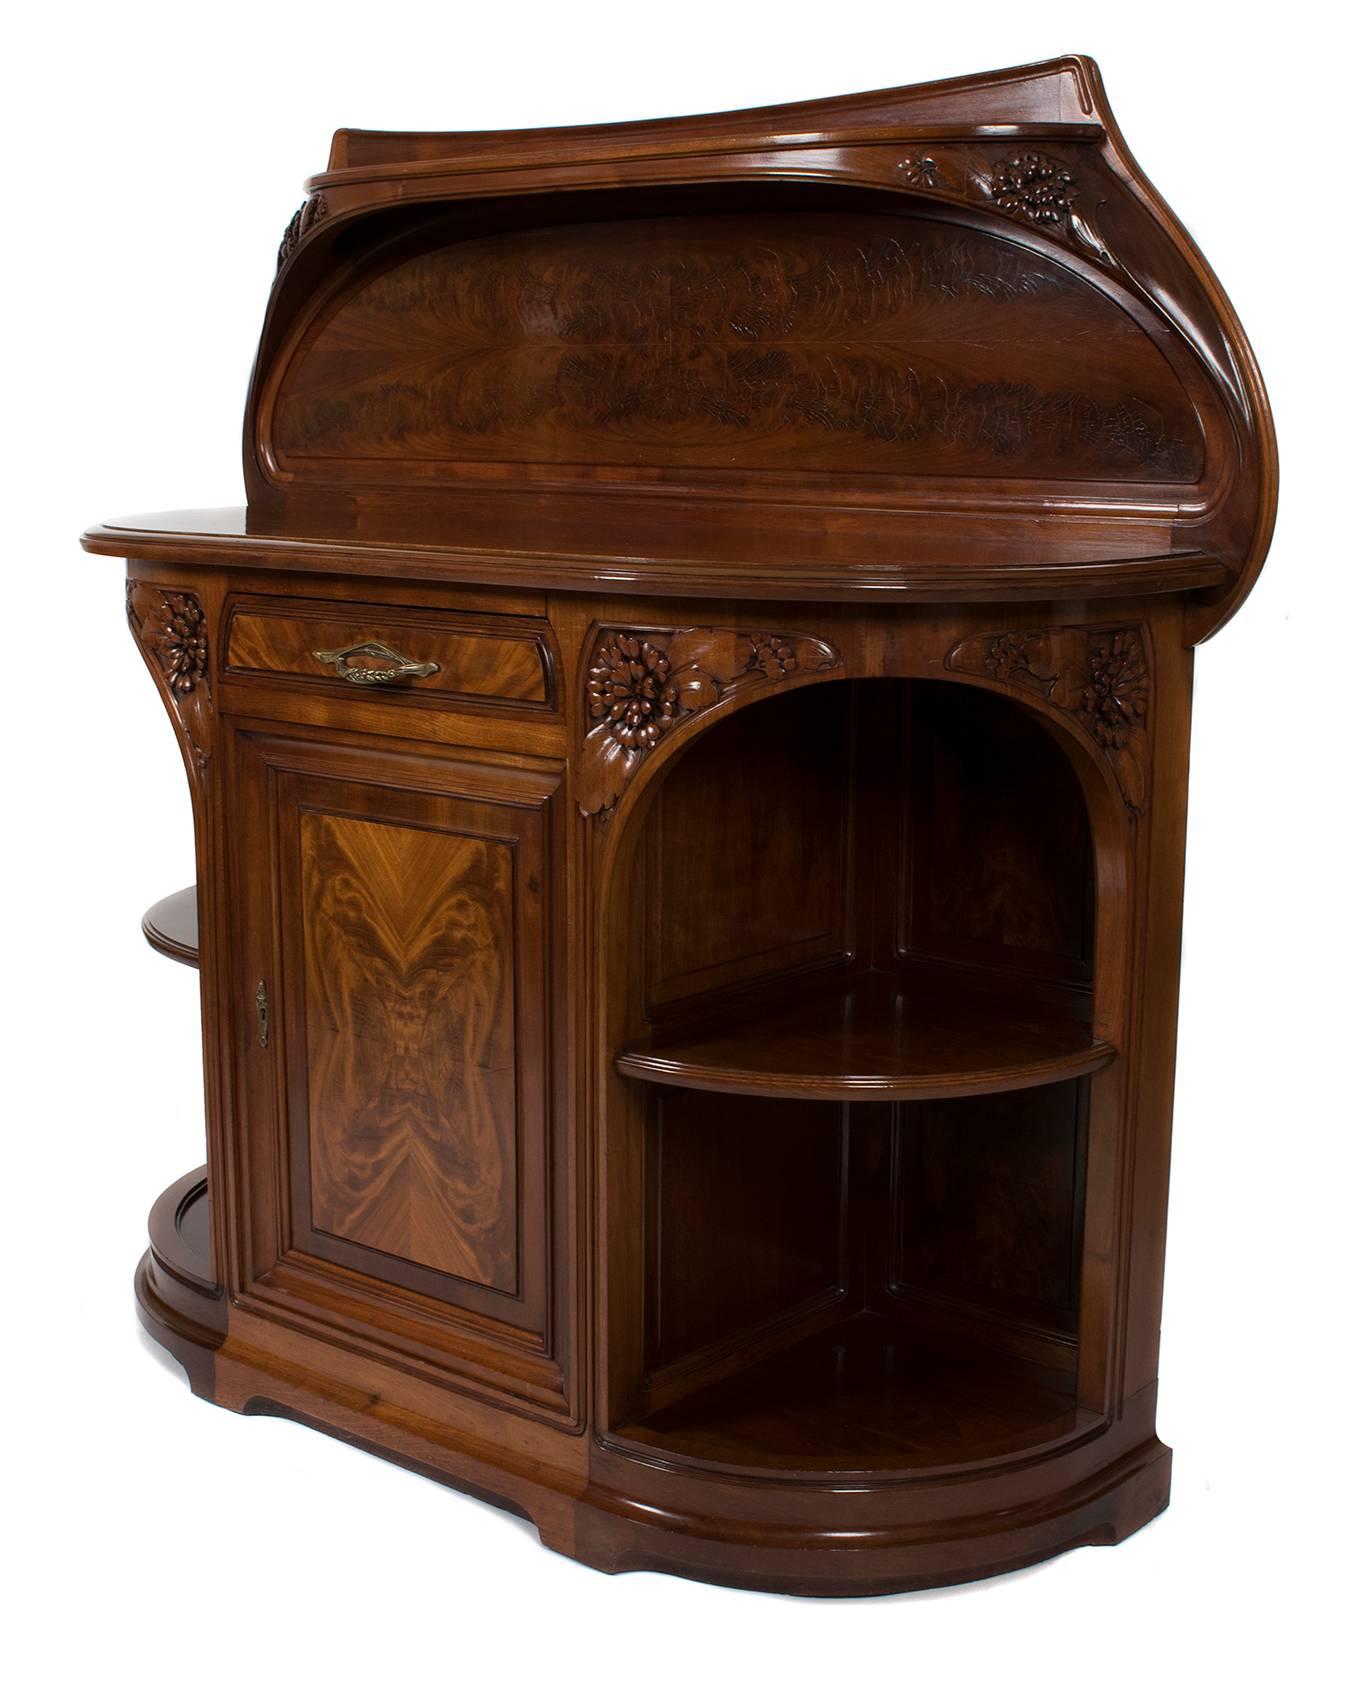 A Louis Majorelle French Art Nouveau period mahogany sideboard "Vicorne" with carved decoration, circa 1900.

Majorelle (1859-1926) was a French decorator and furniture designer who manufactured his own designs in the French tradition of